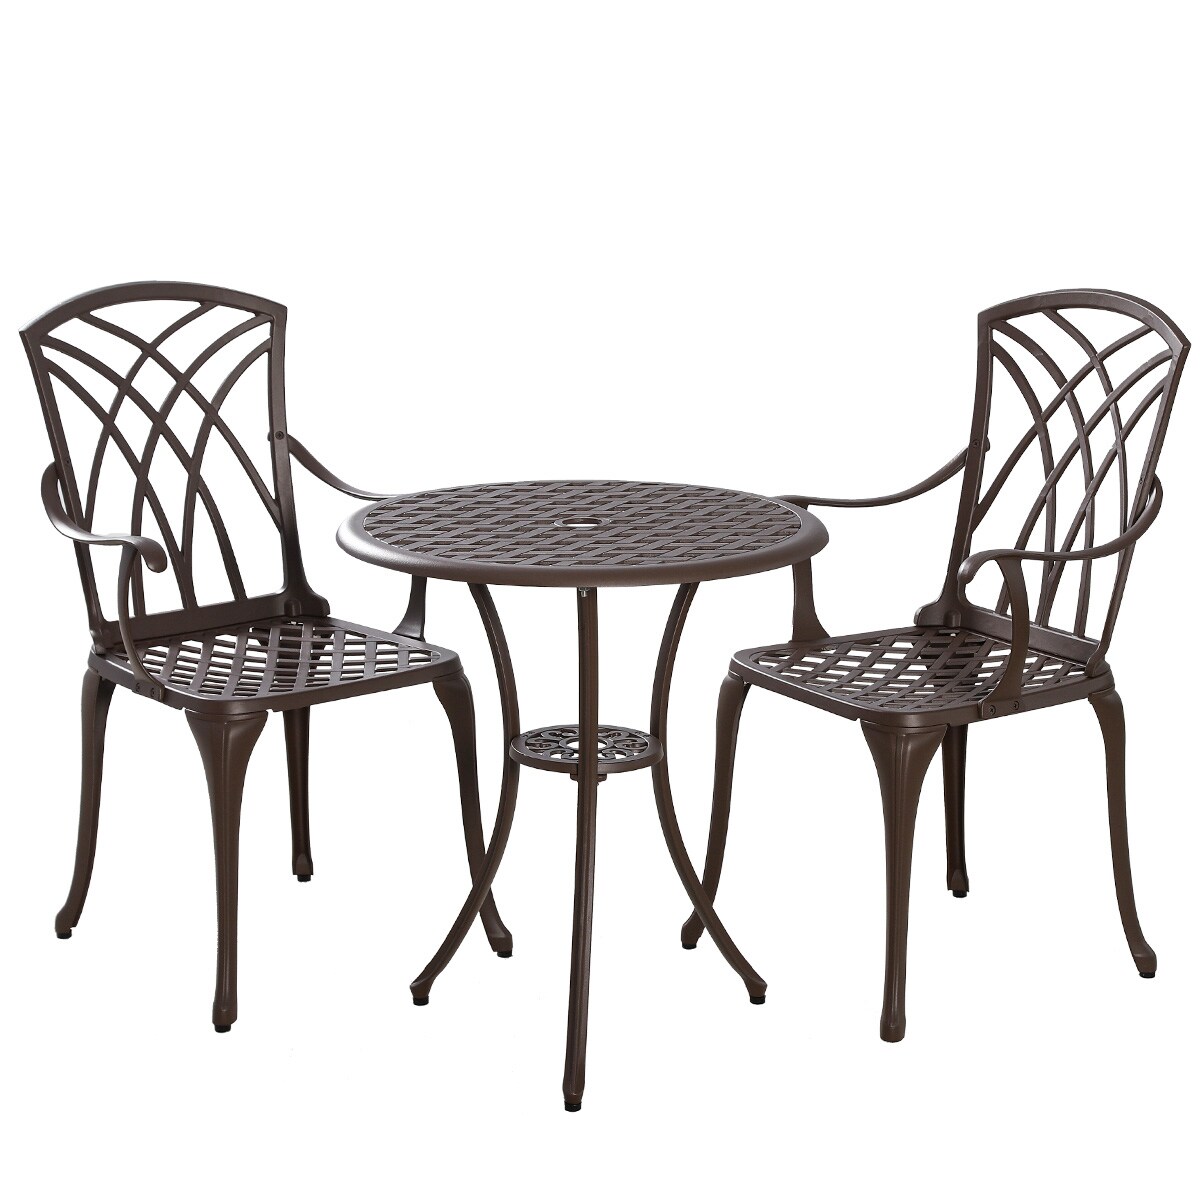 Weatherproof with Timeless Design Kinger Home 3 Piece Patio Bistro Table Set Outdoor Furniture Cast Aluminum Bistro Set Table with Cushions Black 